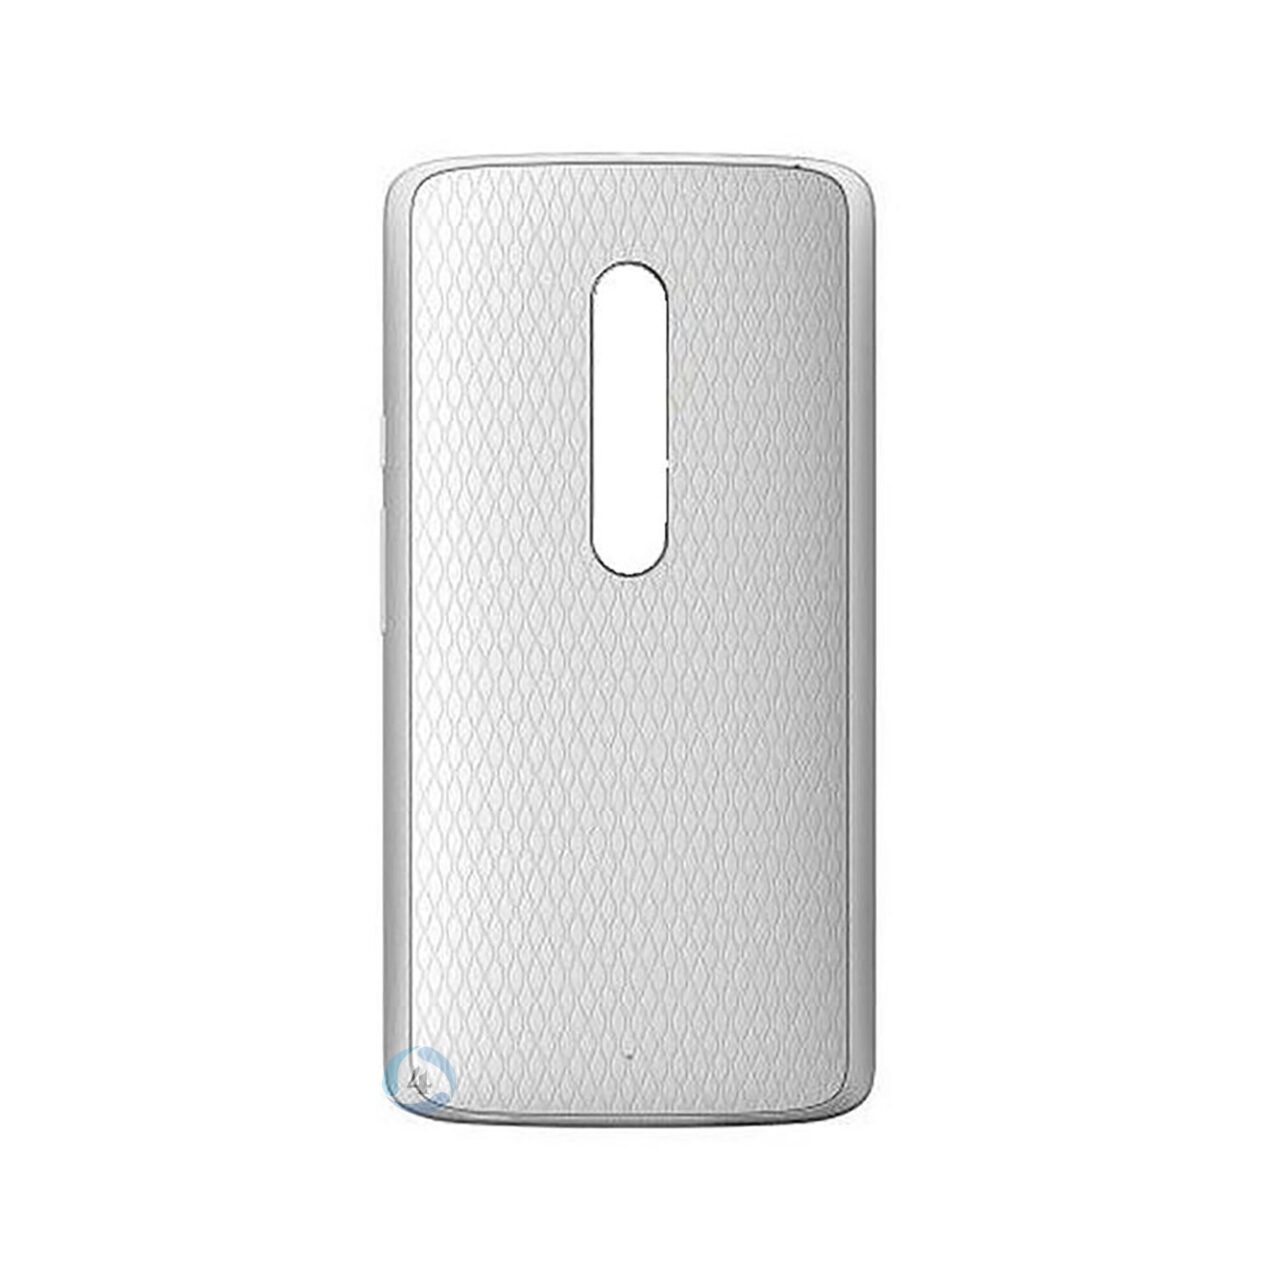 Moto x play backcover white